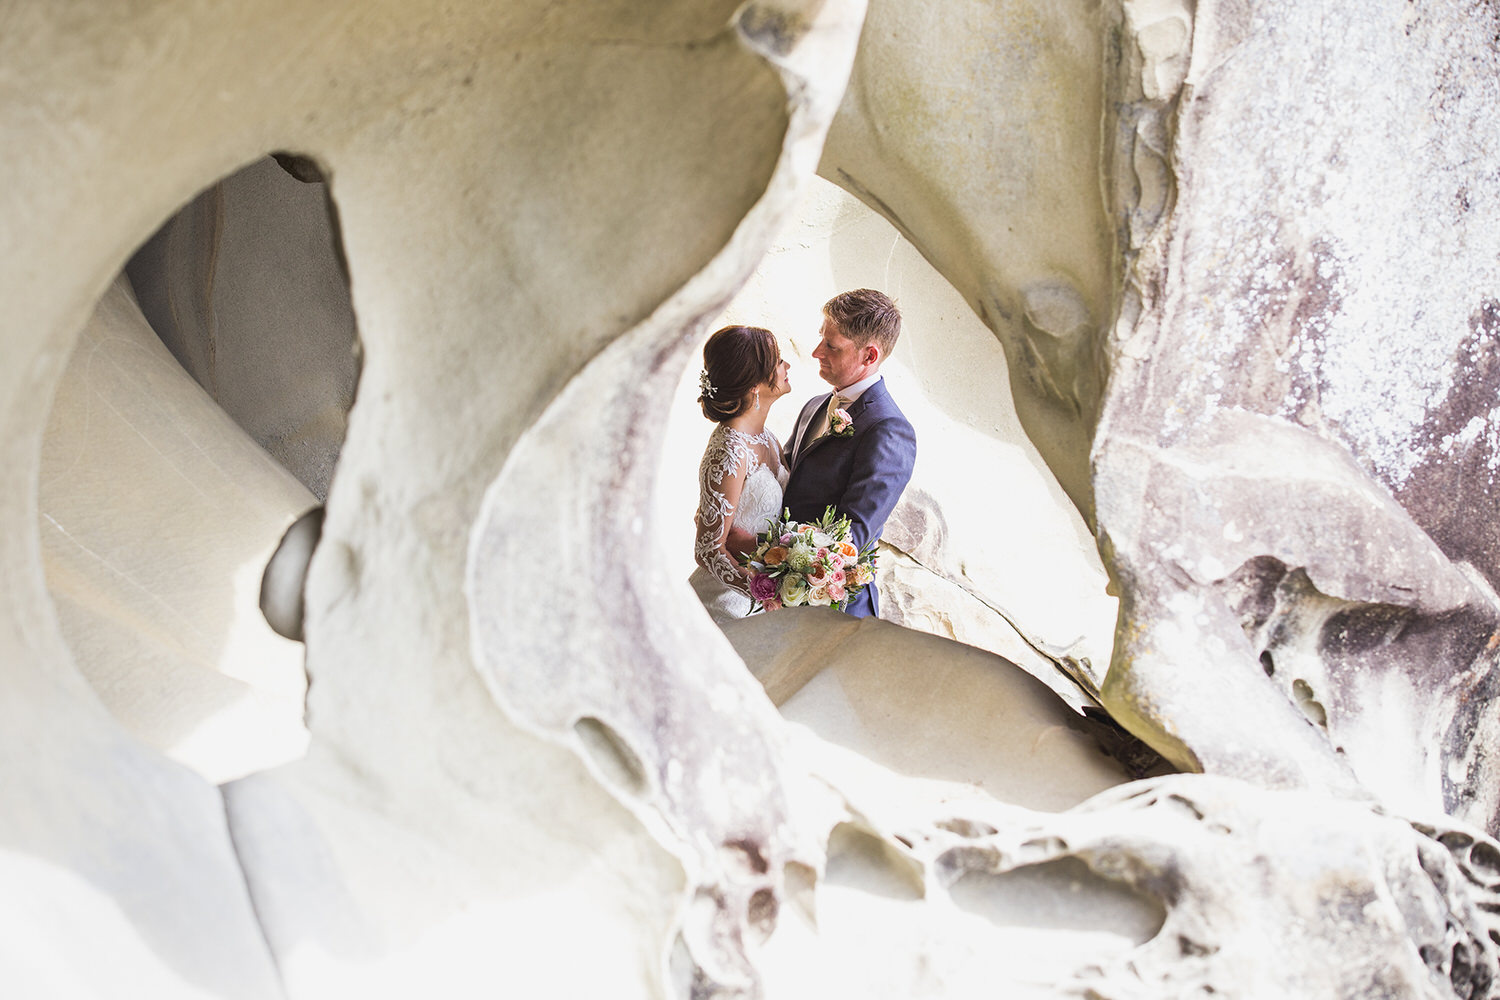 A bride and groom embrace at Retreat Cove on Galiano Island